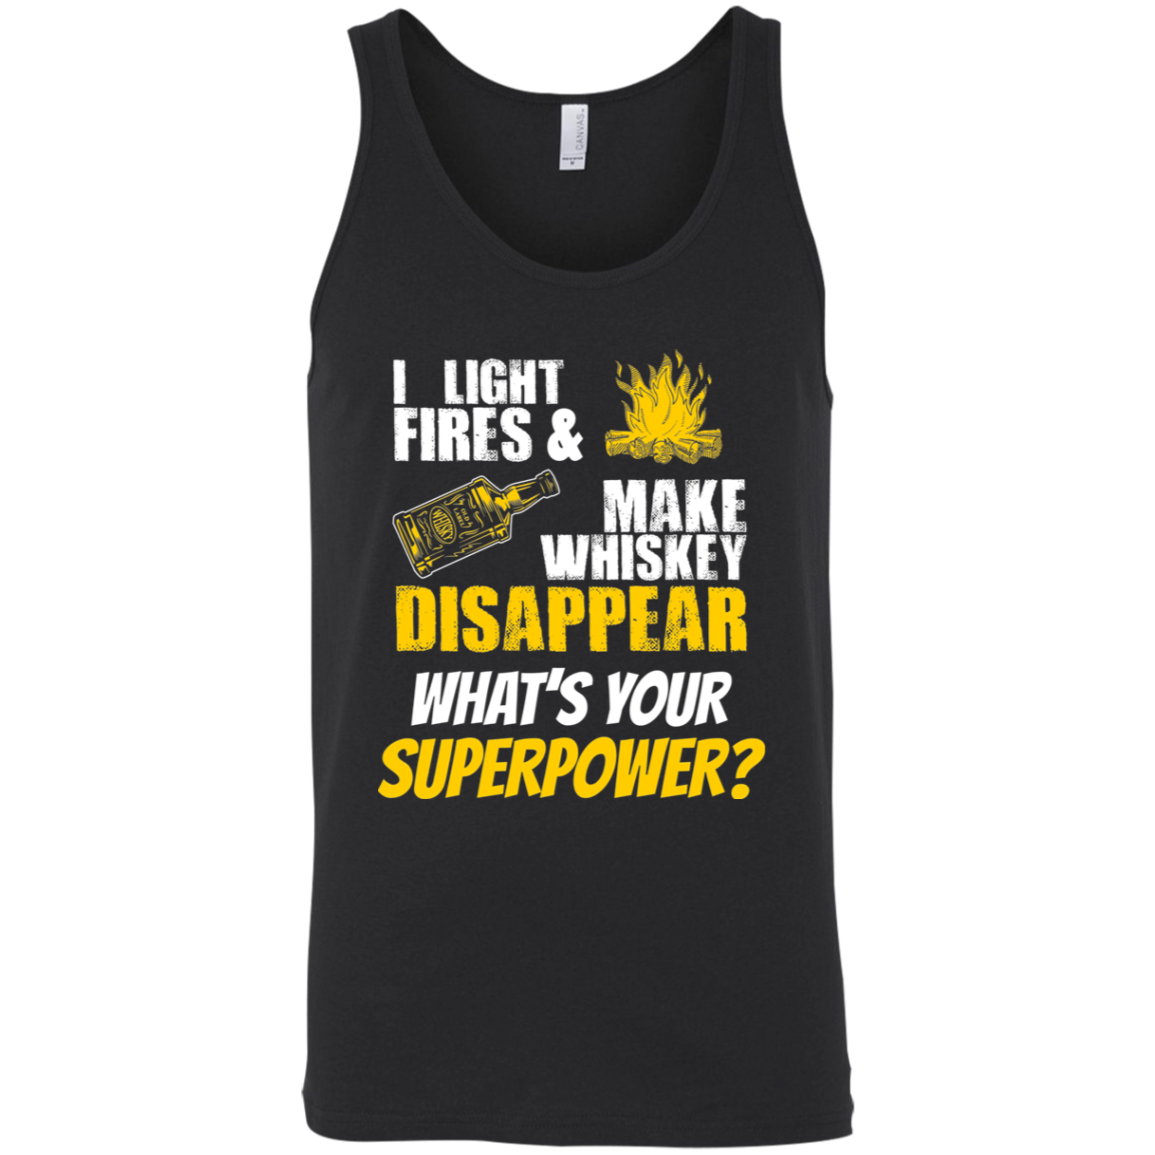 I Light Fires And Make Whiskey Disappear What's Your Superpower? Tank Top Apparel - The Beer Lodge